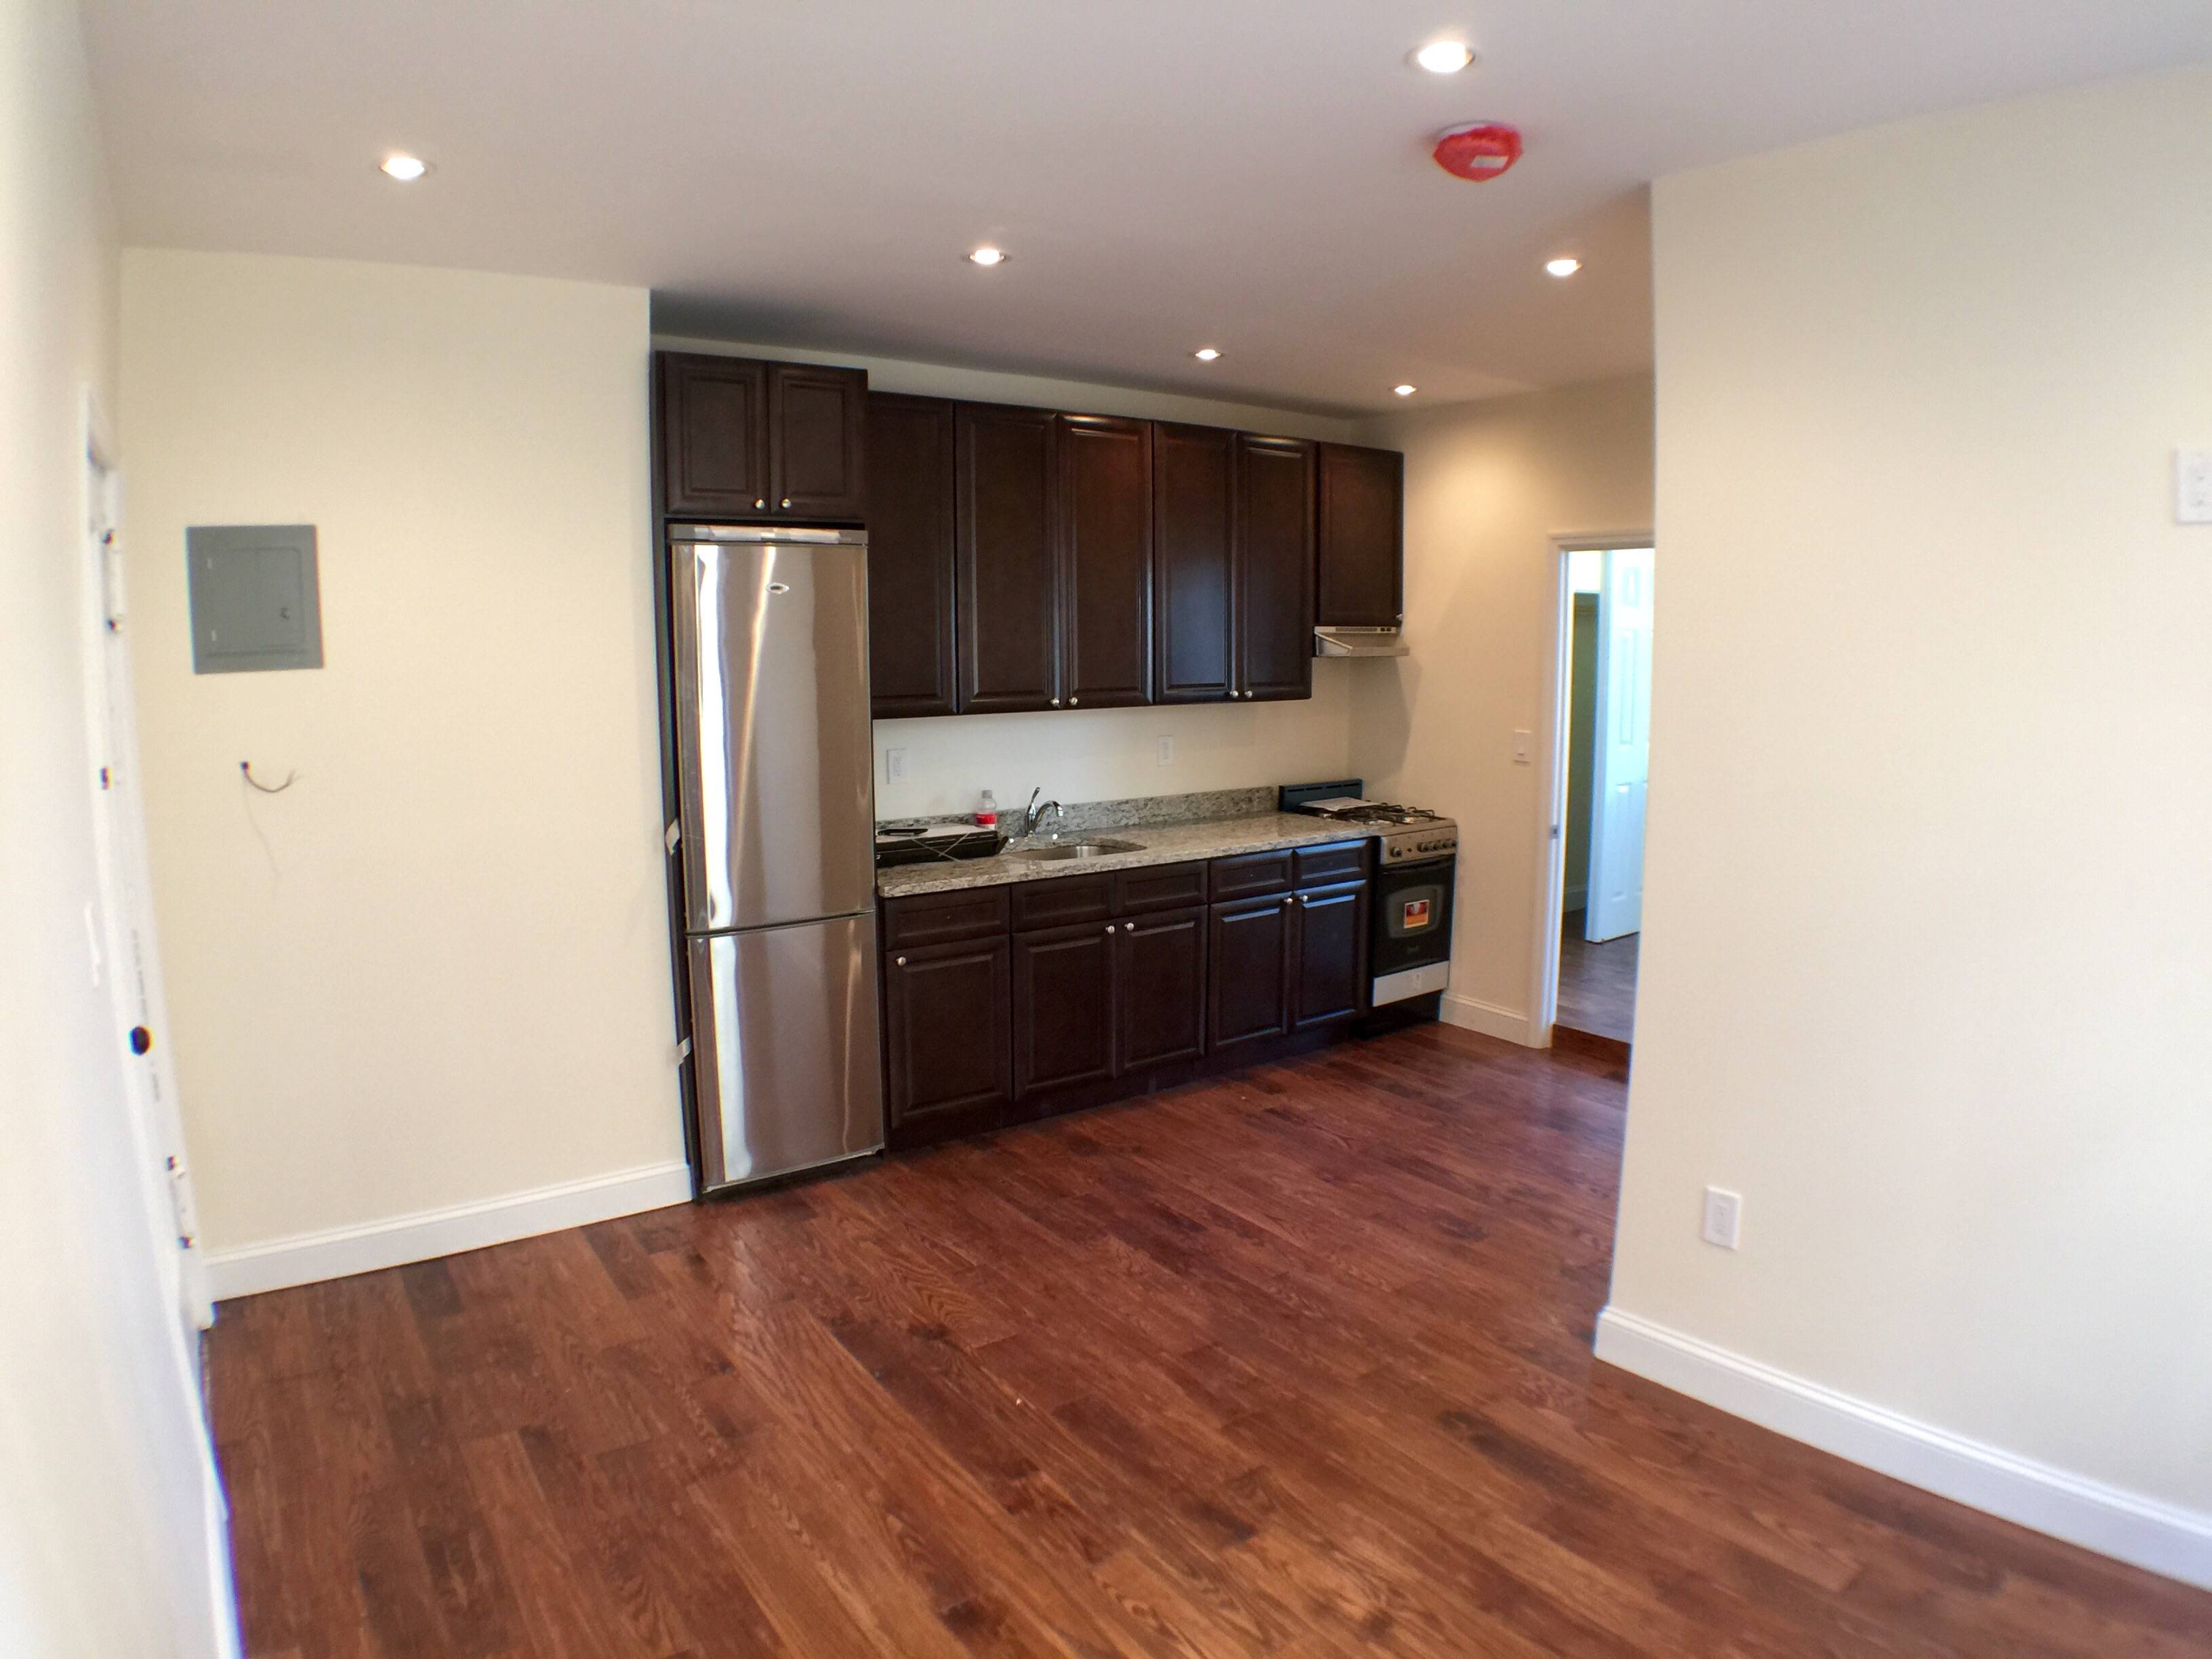 ASTORIA 1Br $1,800.00/MO - PRIME LOCATION IN THE HEART OF IT ALL - 30th Avenue Subway Stop - JUST RENOVATED